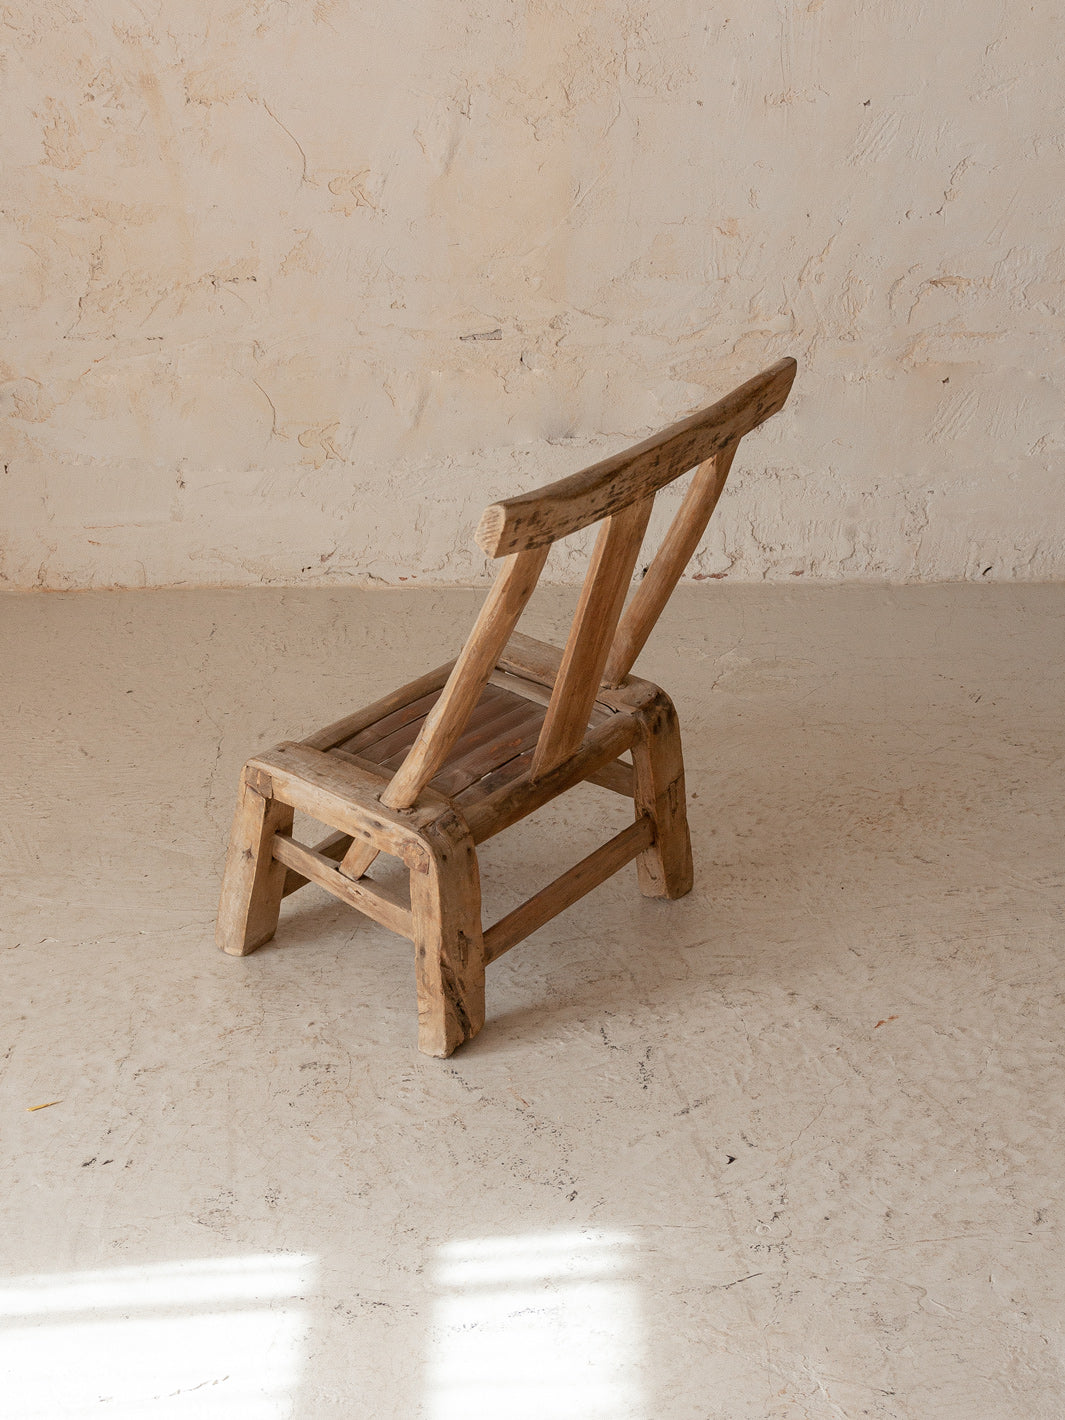 Chinese elm and bamboo chair